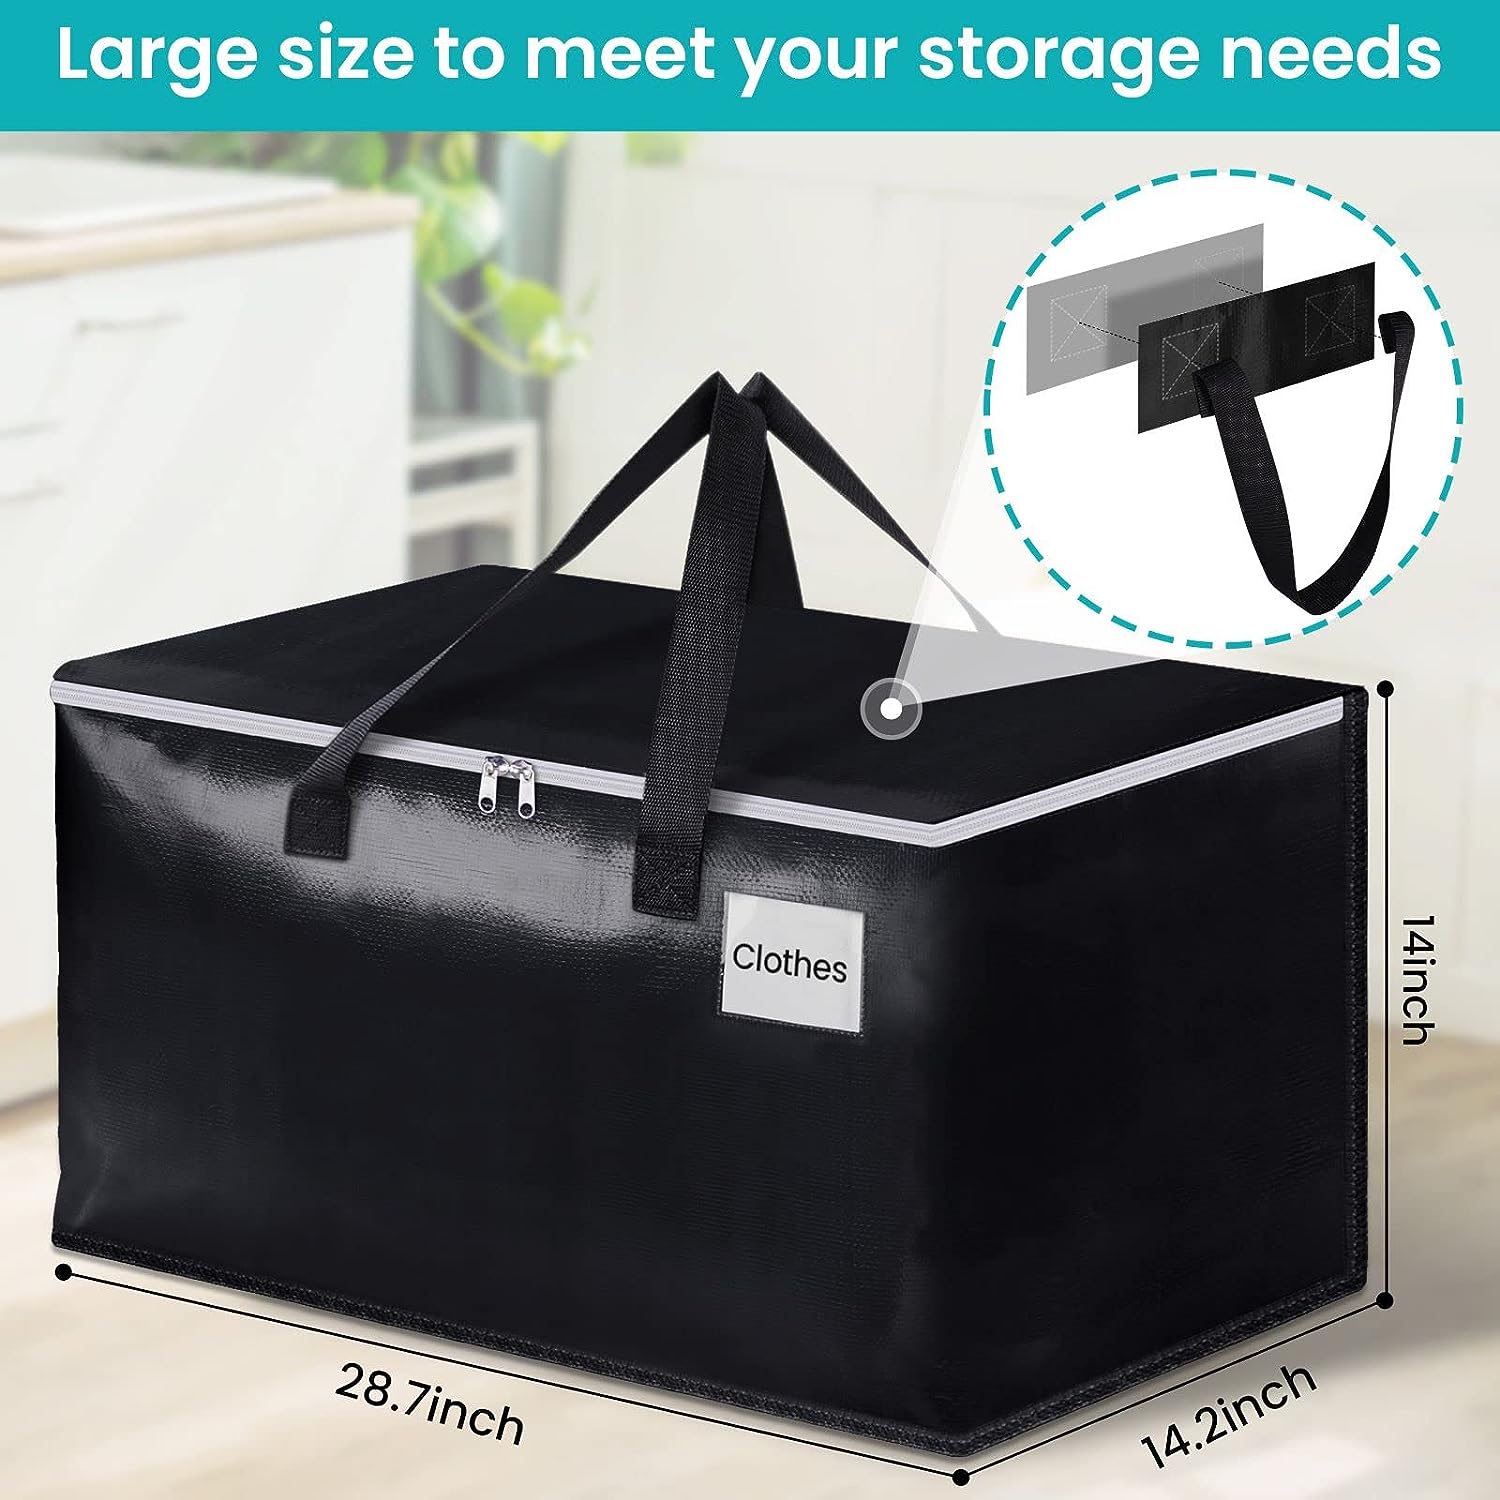 Extra Large Moving Boxes-Zippered Moving Bags with Handles and Tag Pocket-Moving Supplies for Space Saving-Storage Solutions for Moving, Storage, Camping, and Travel - Delicate Leather